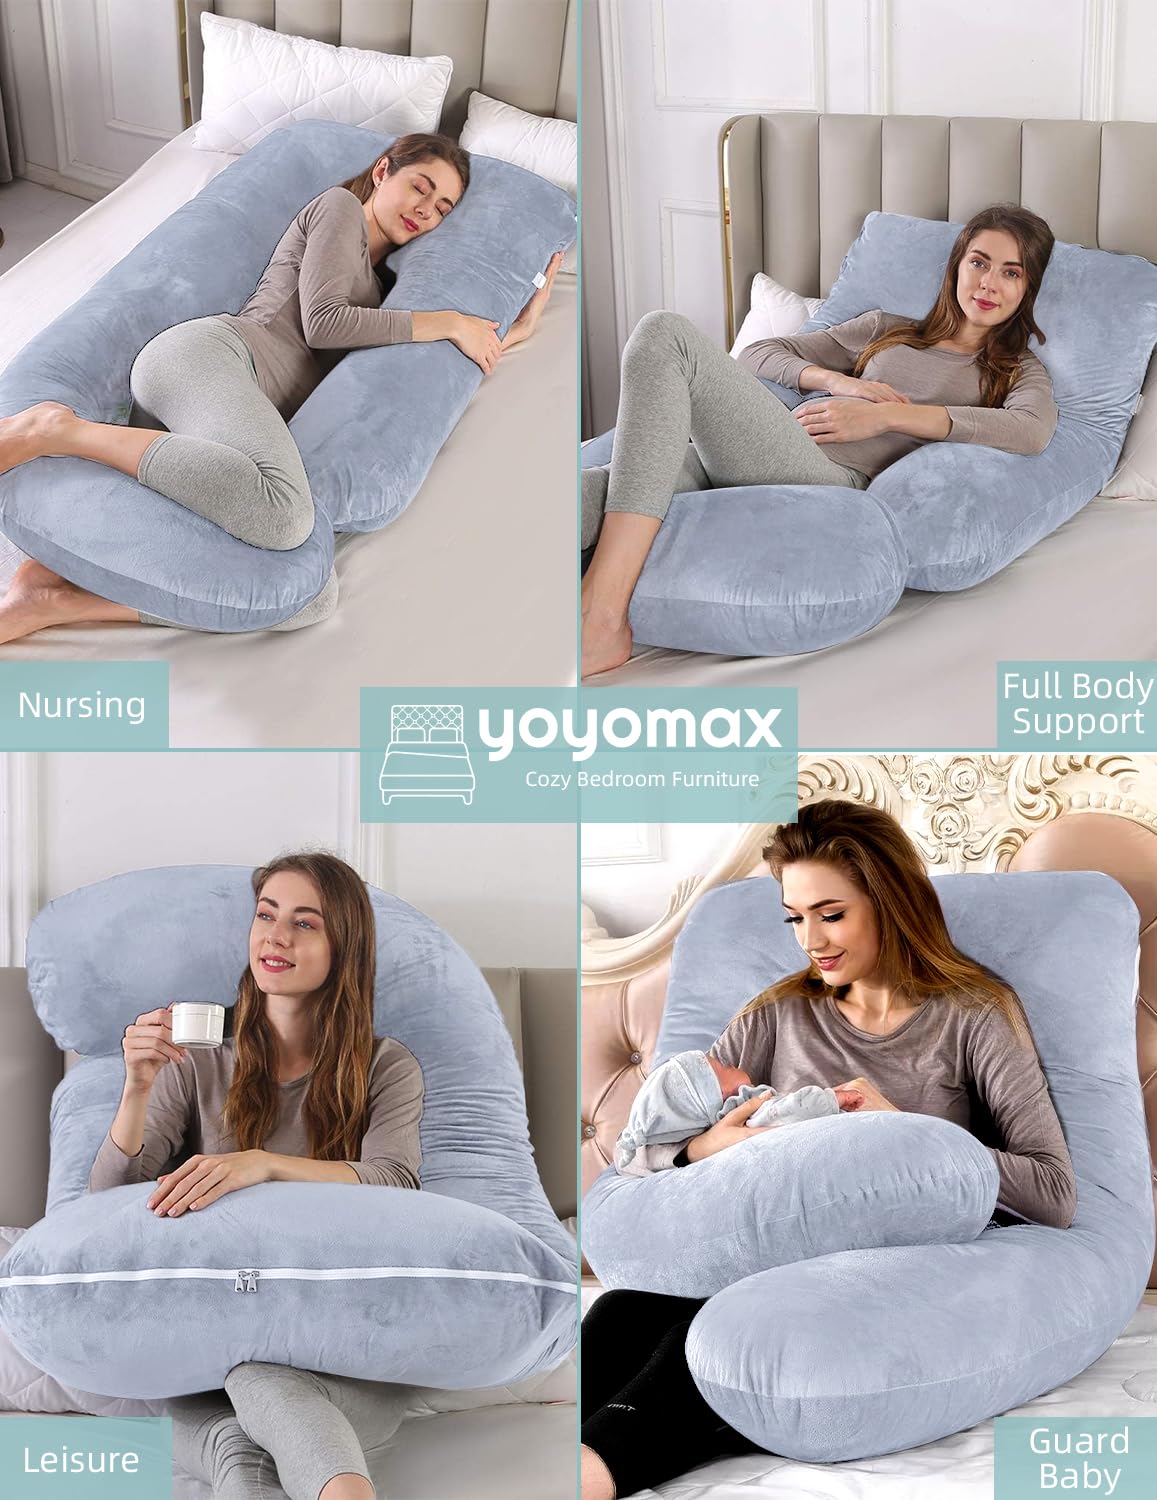 yoyomax Pregnancy Pillows, U Shaped Full Body Maternity Pillow Memory Foam Pregnancy Pillow with Removable Cover, 57 Inch Pregnancy Pillows for Sleeping (Grey)